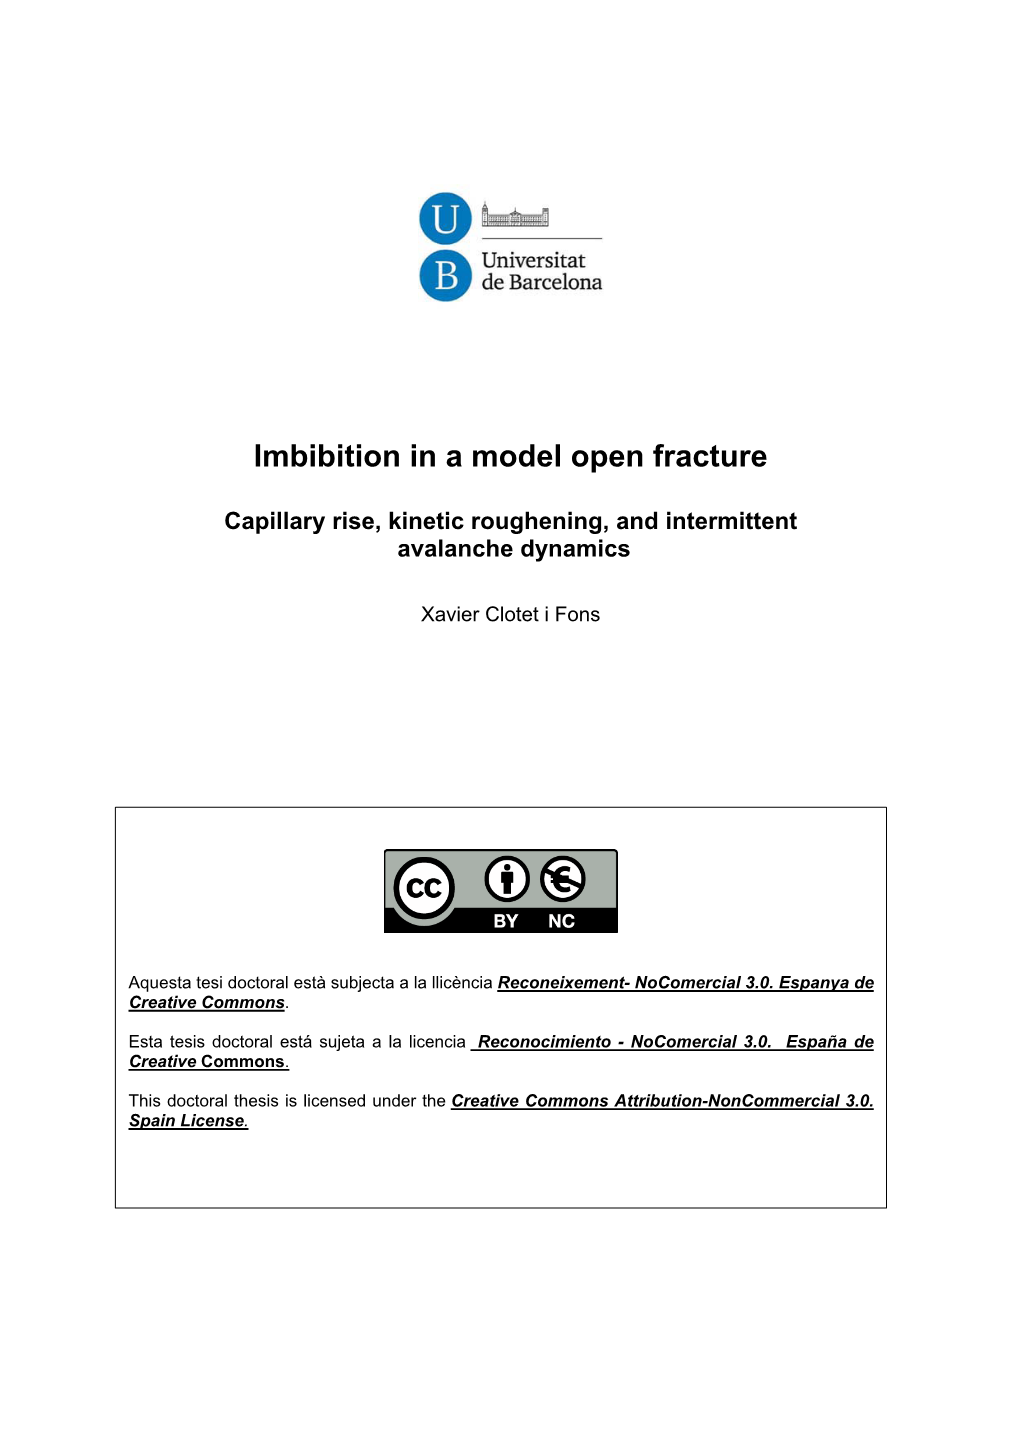 Imbibition in a Model Open Fracture